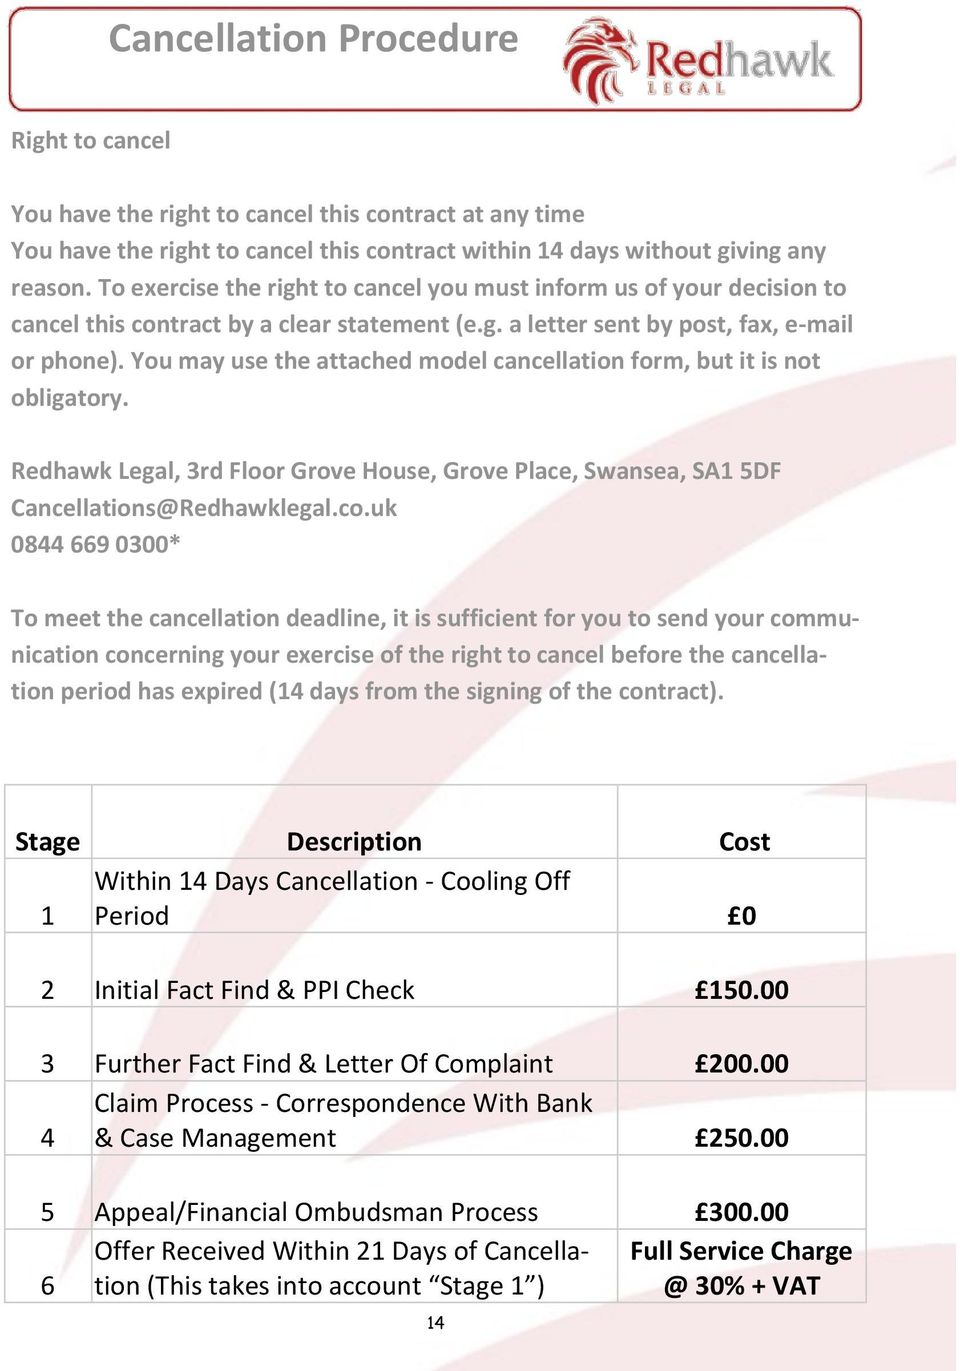 You may use the attached model cancellation form, but it is not obligatory. Redhawk Legal, 3rd Floor Grove House, Grove Place, Swansea, SA1 5DF Cancellations@Redhawklegal.co.